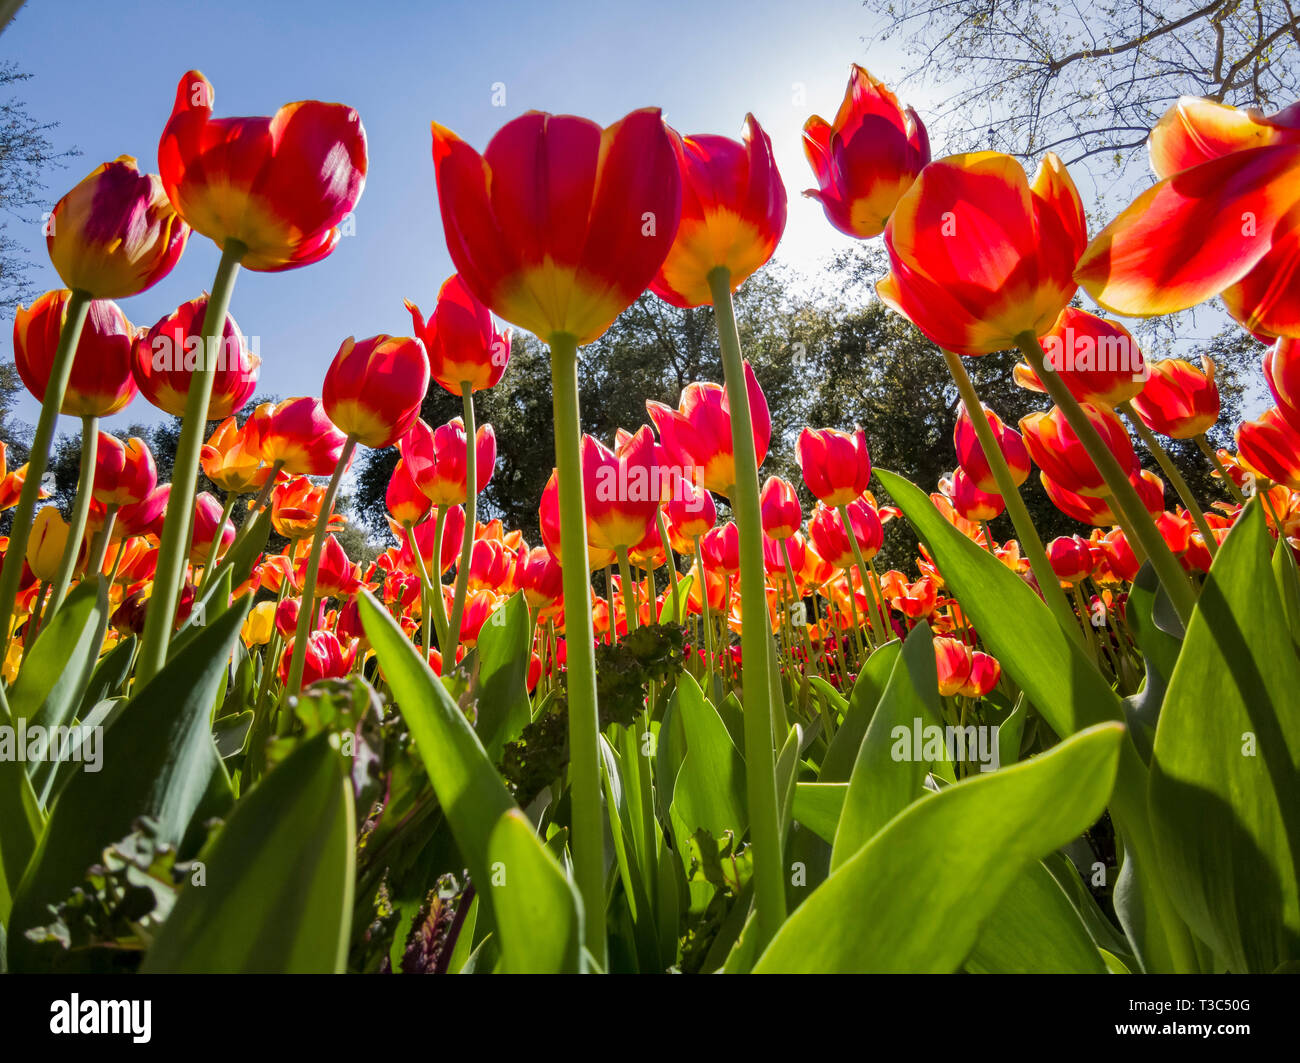 Looking Up The Beautiful Tulips Blossom From The Ground In A Sunny